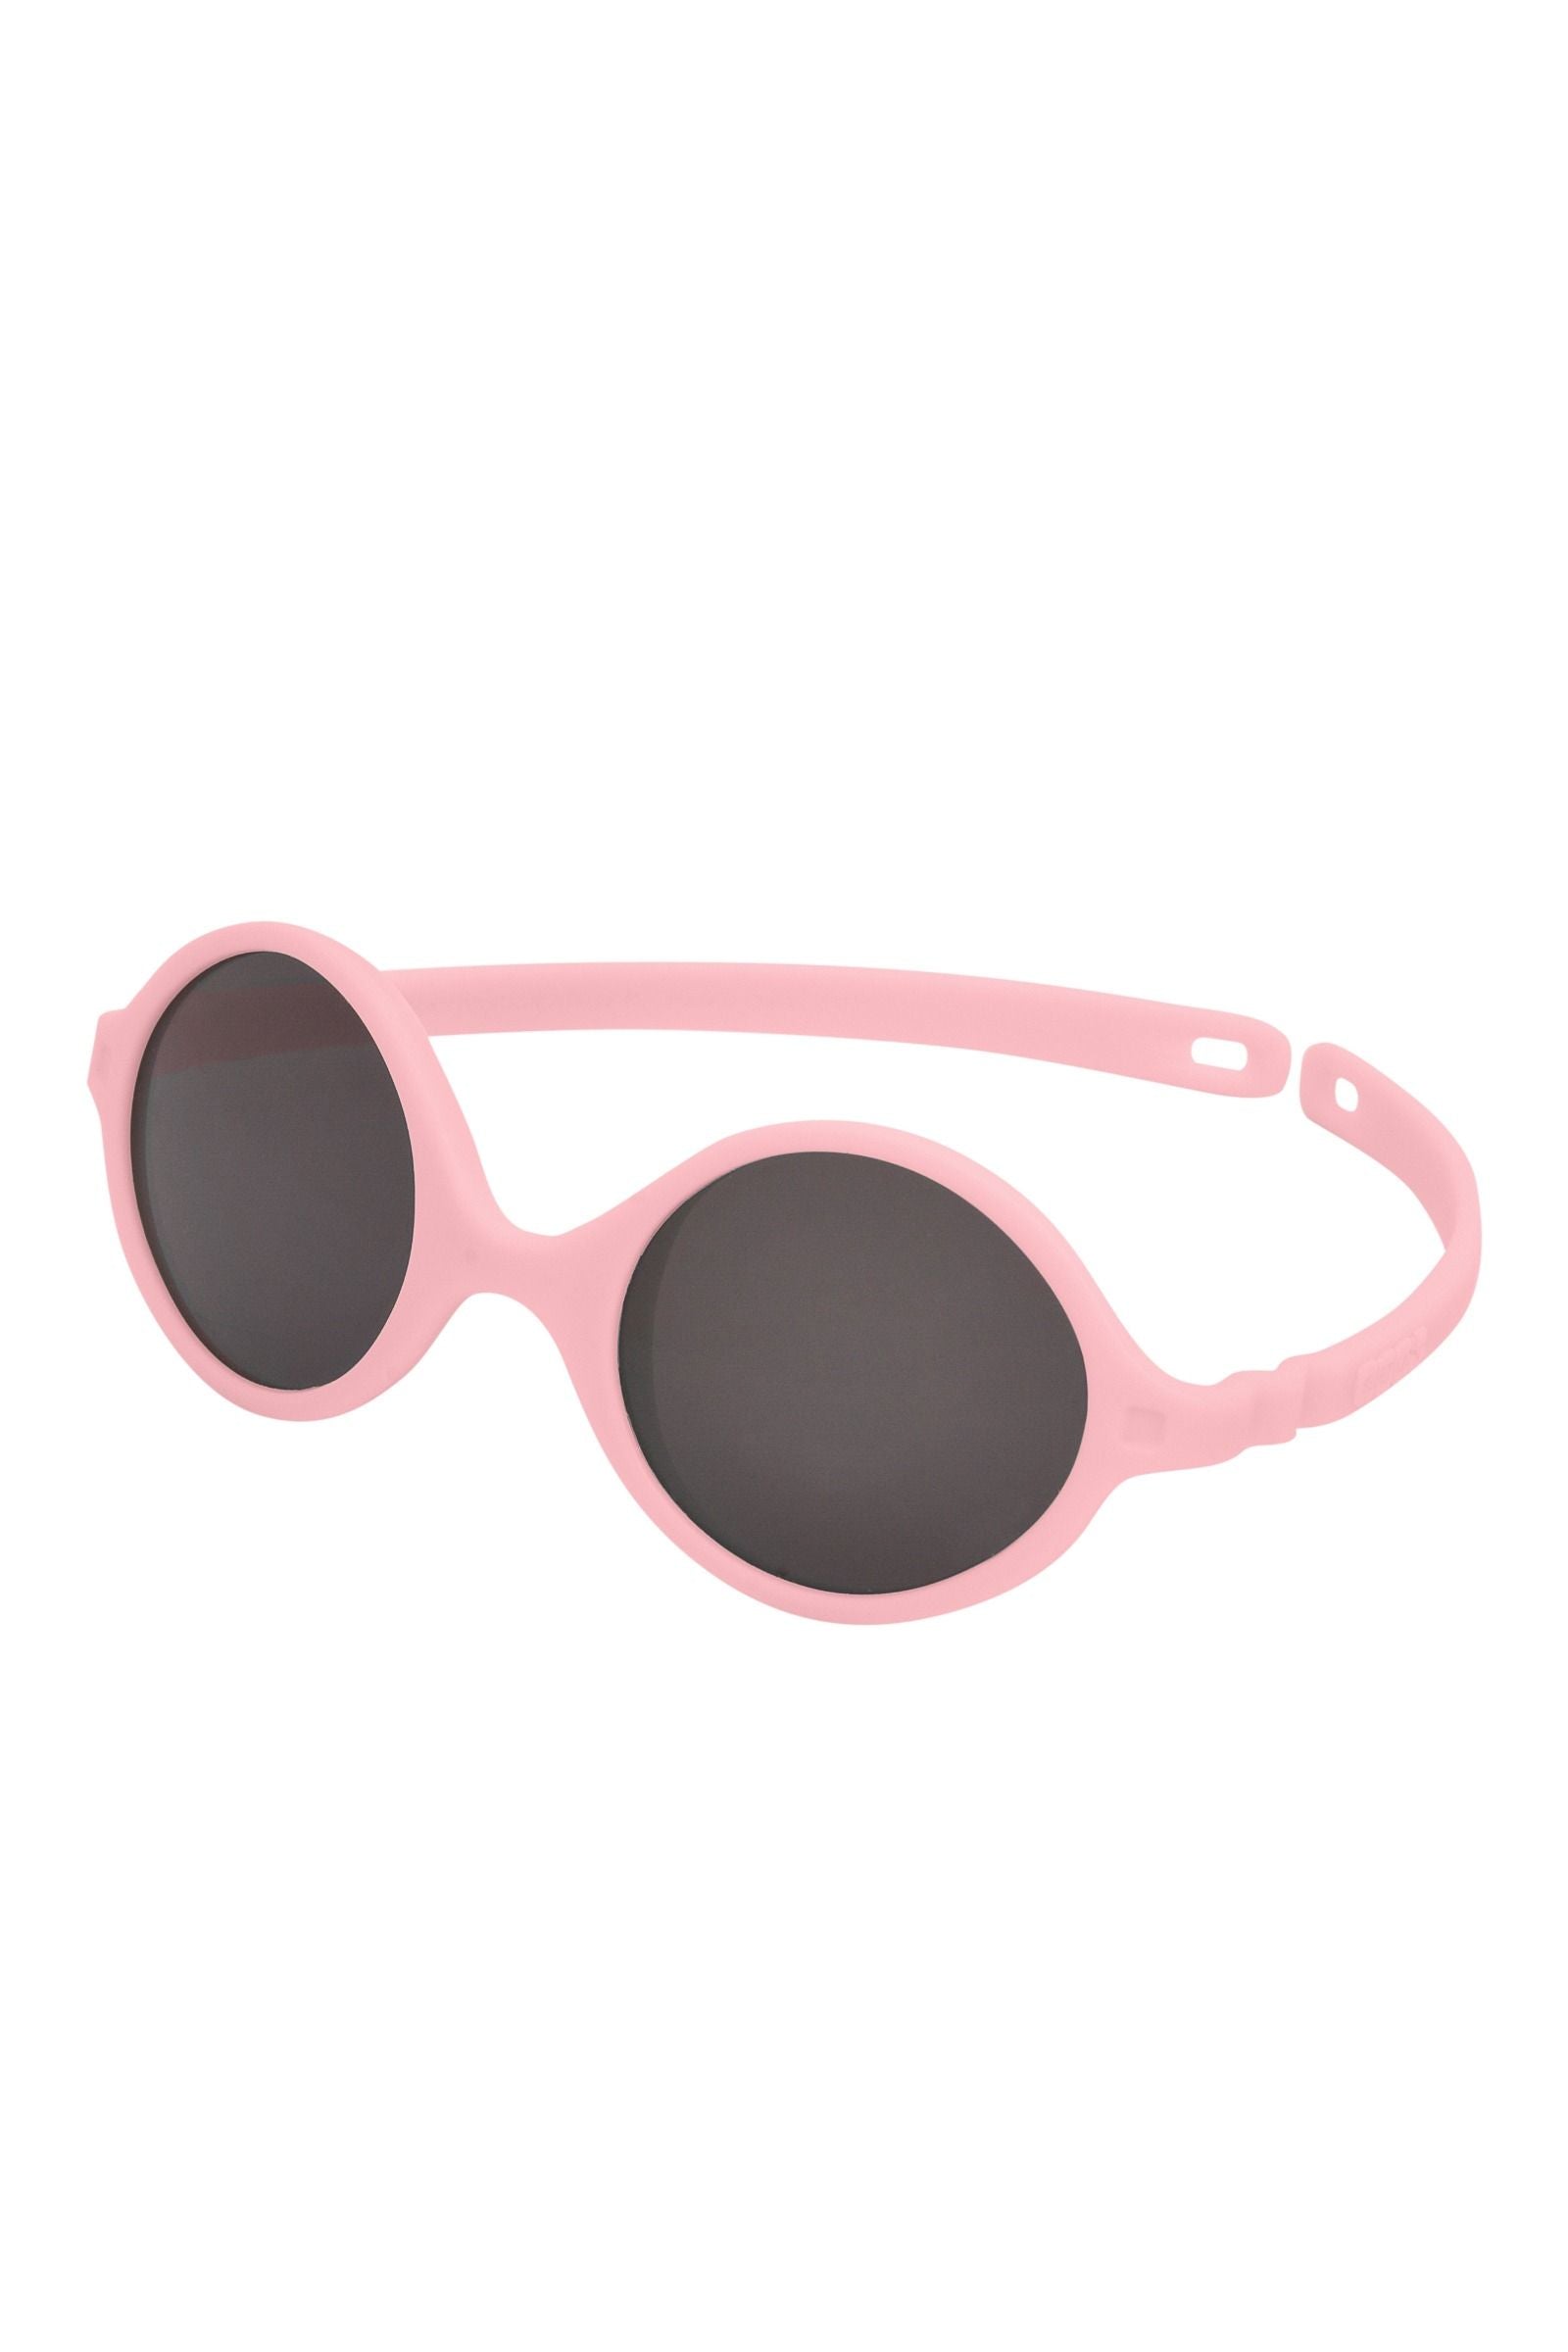 Sunglasses Diabola Blush Pink with UV Protection side